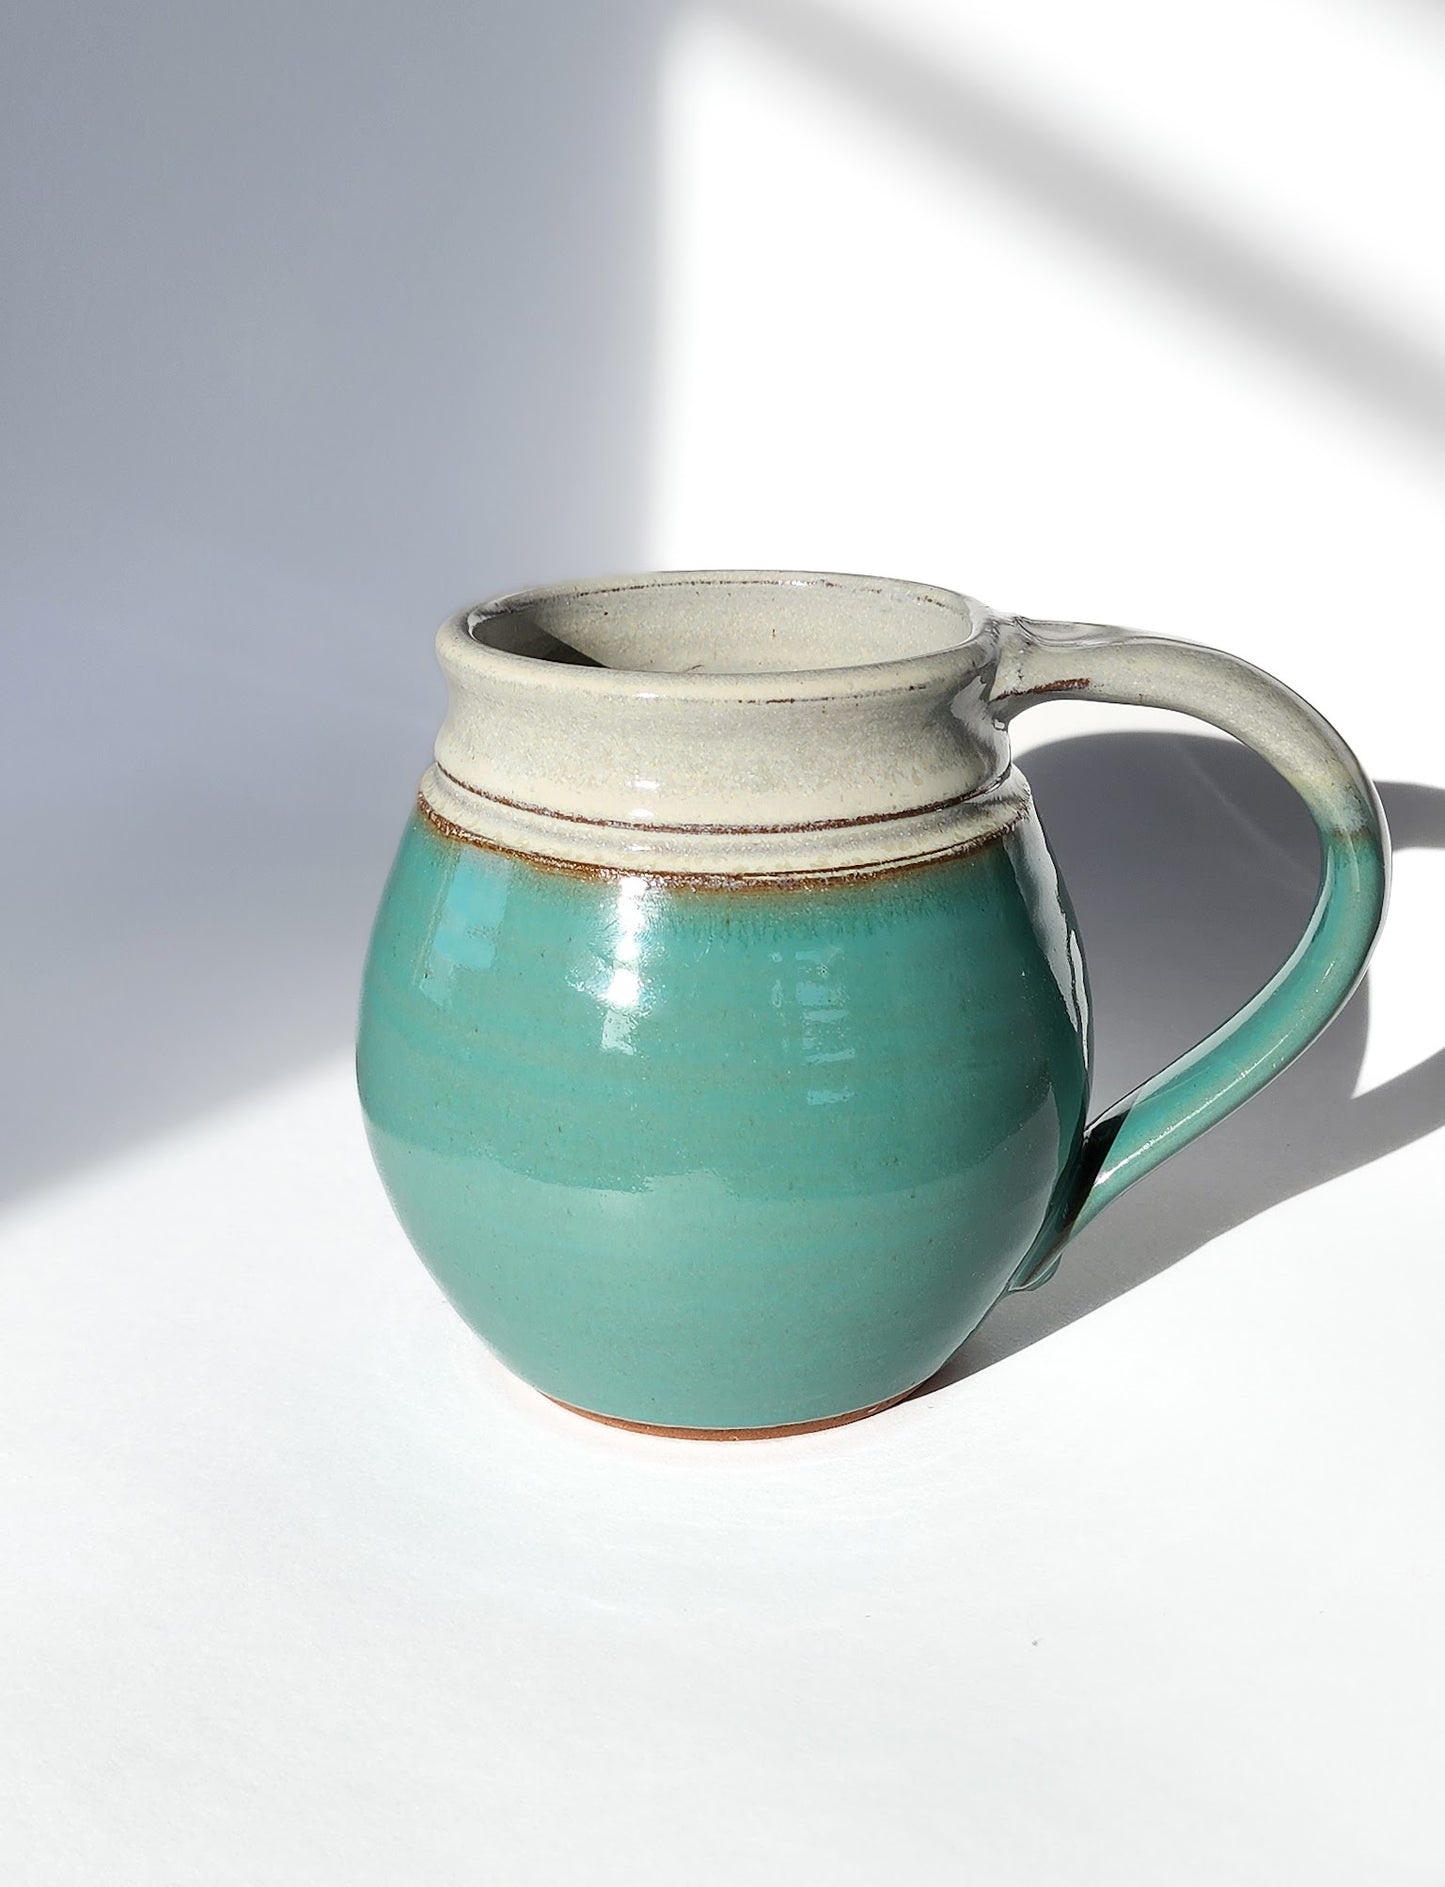 Image: Clinton Pottery's 30 oz Jumbo Mug in Sky Blue – A serene and generously sized addition to your kitchen, this machine washable mug seamlessly blends artistry with functionality. The soothing Sky Blue color adds a touch of tranquility, reminiscent of clear skies and calming waters. Perfect for enjoying ample servings of your favorite coffee or tea with a breath of peaceful charm.